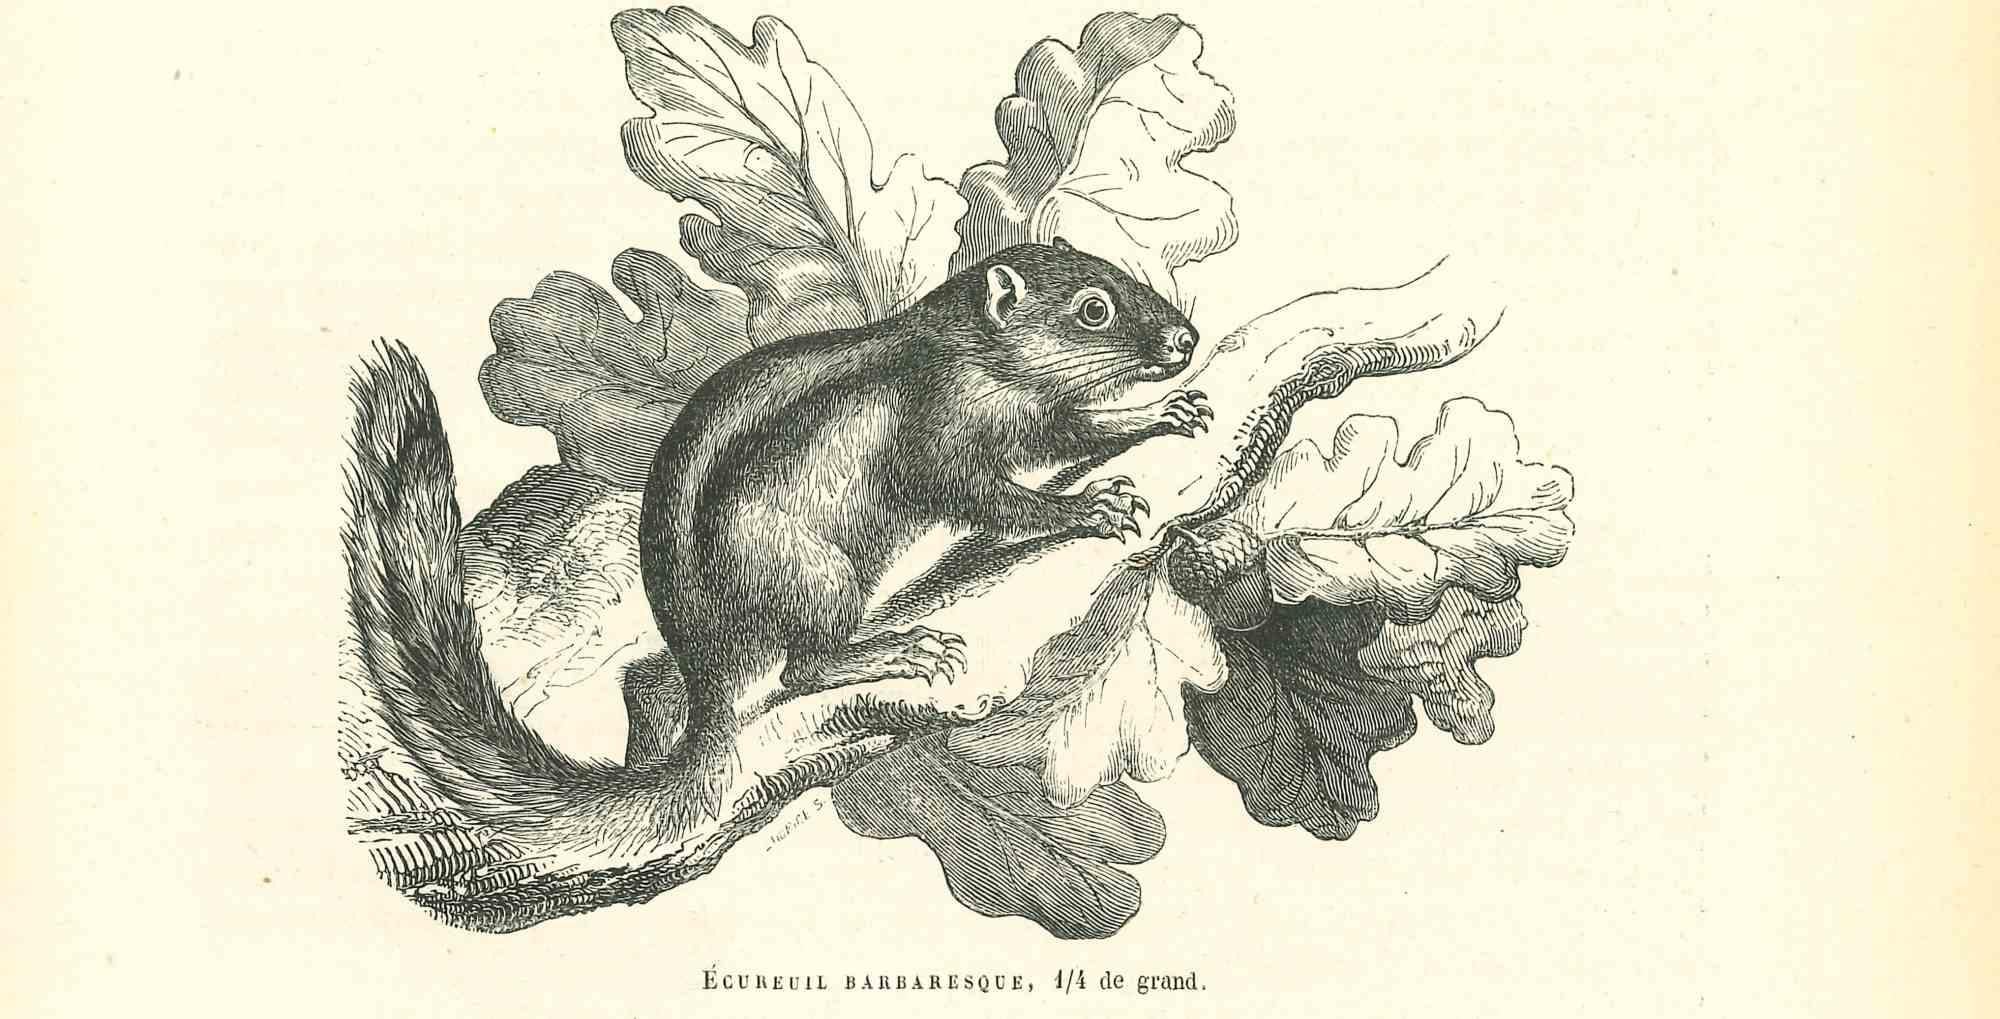 The Squirrel is an original lithograph on ivory-colored paper, realized by Paul Gervais (1816-1879). The artwork is from The Series of "Les Trois Règnes de la Nature", and was published in 1854.

Good conditions.

Titled on the lower. With the notes